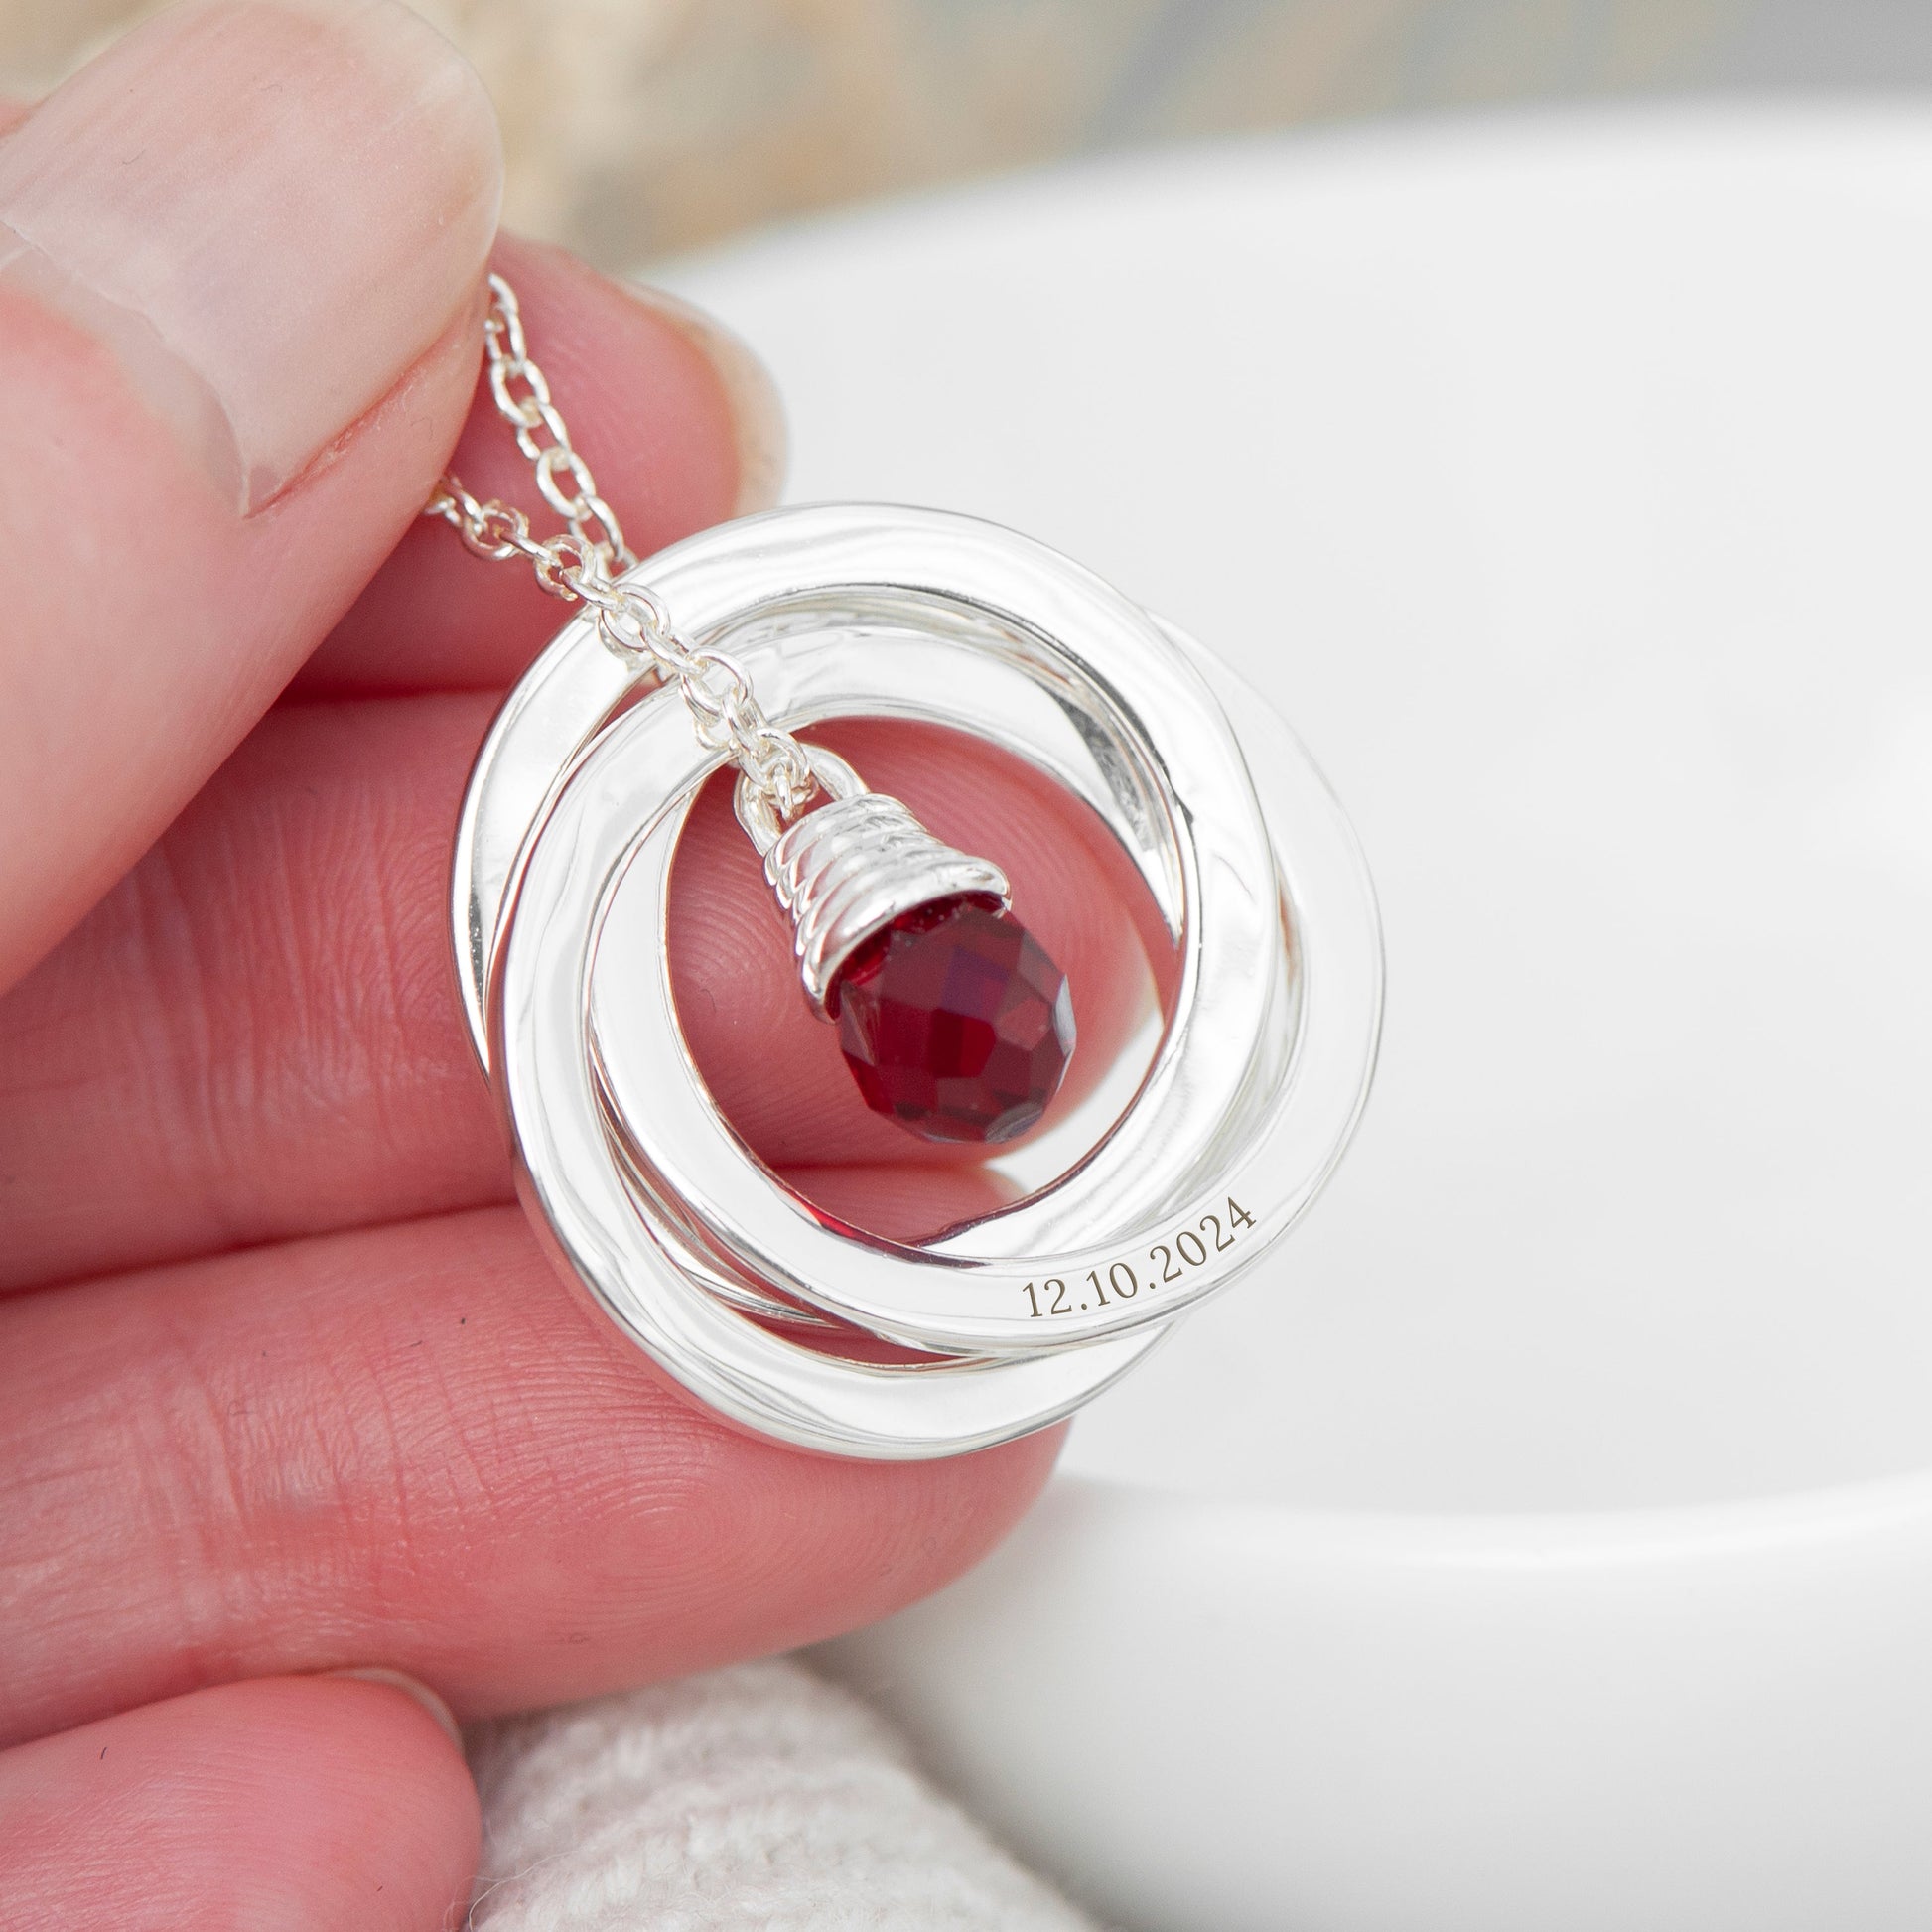 Personalized Necklaces - Personalized Russian Ring Garnet Necklace 